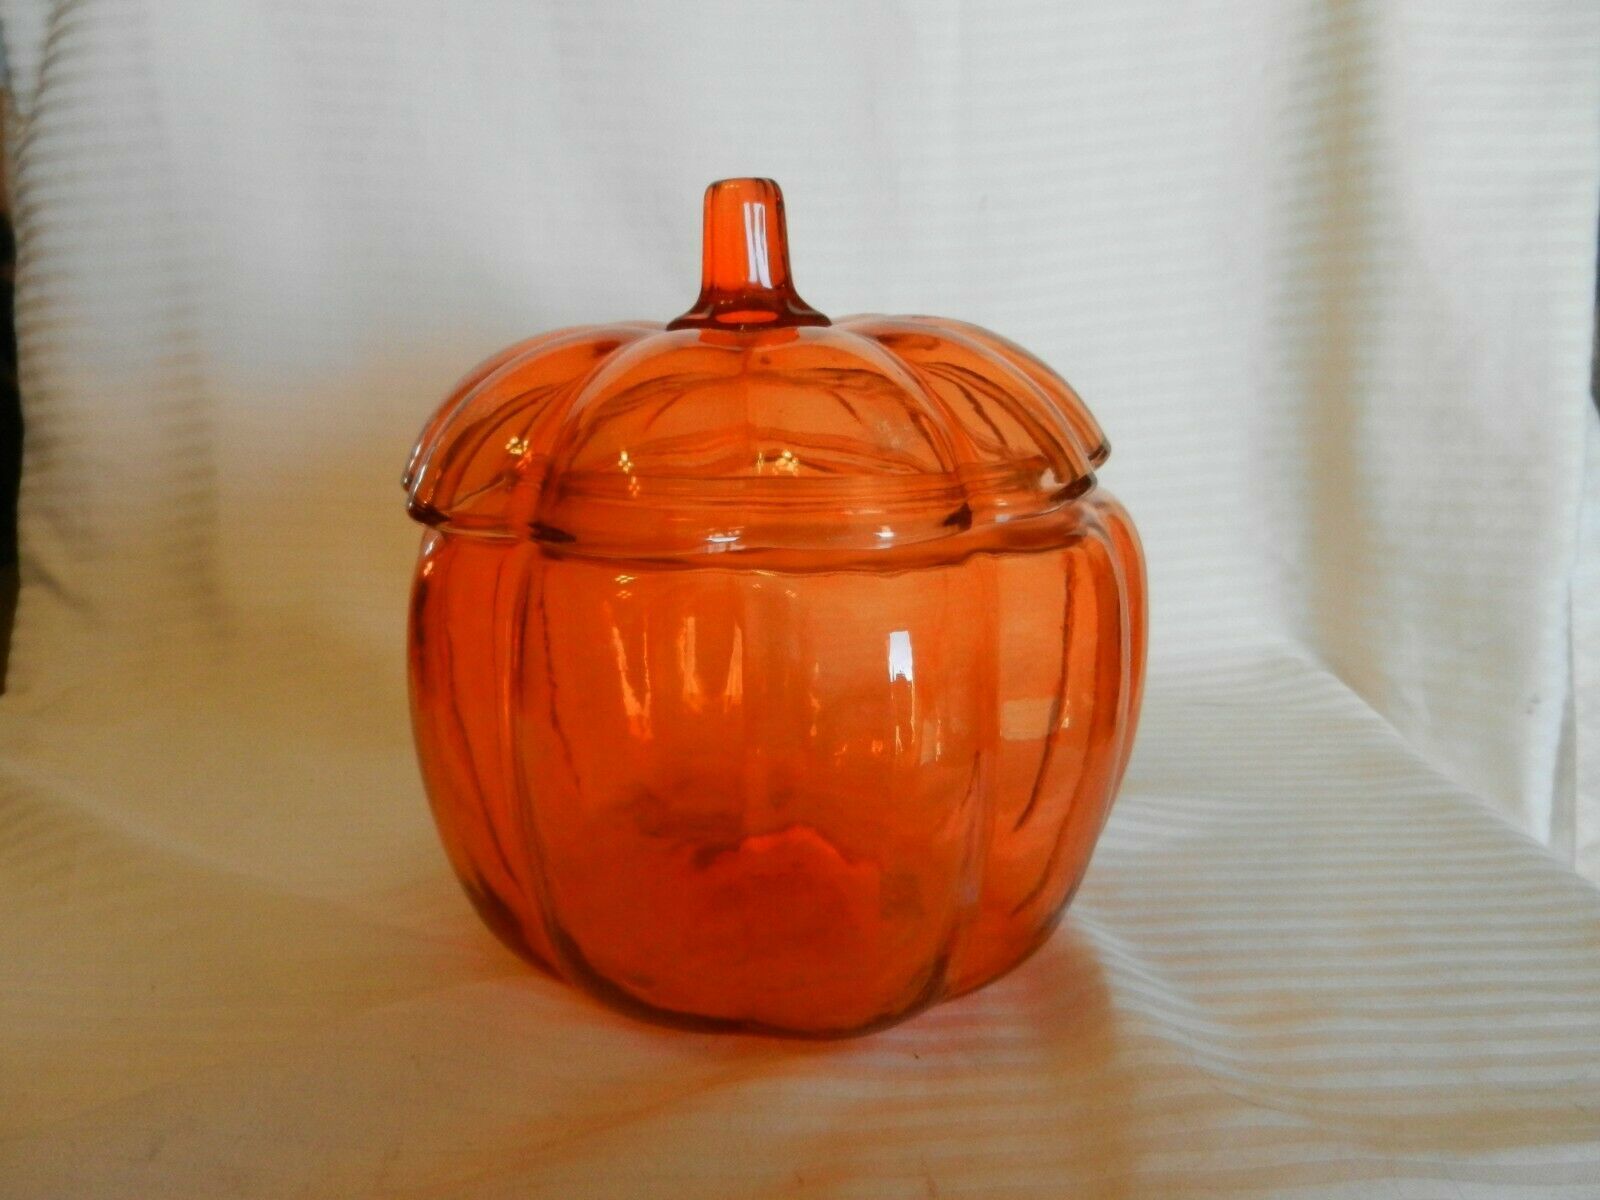 Vintage Orange Glass Pumpkin Cookie or Candy Jar With Lid 7.5" Tall